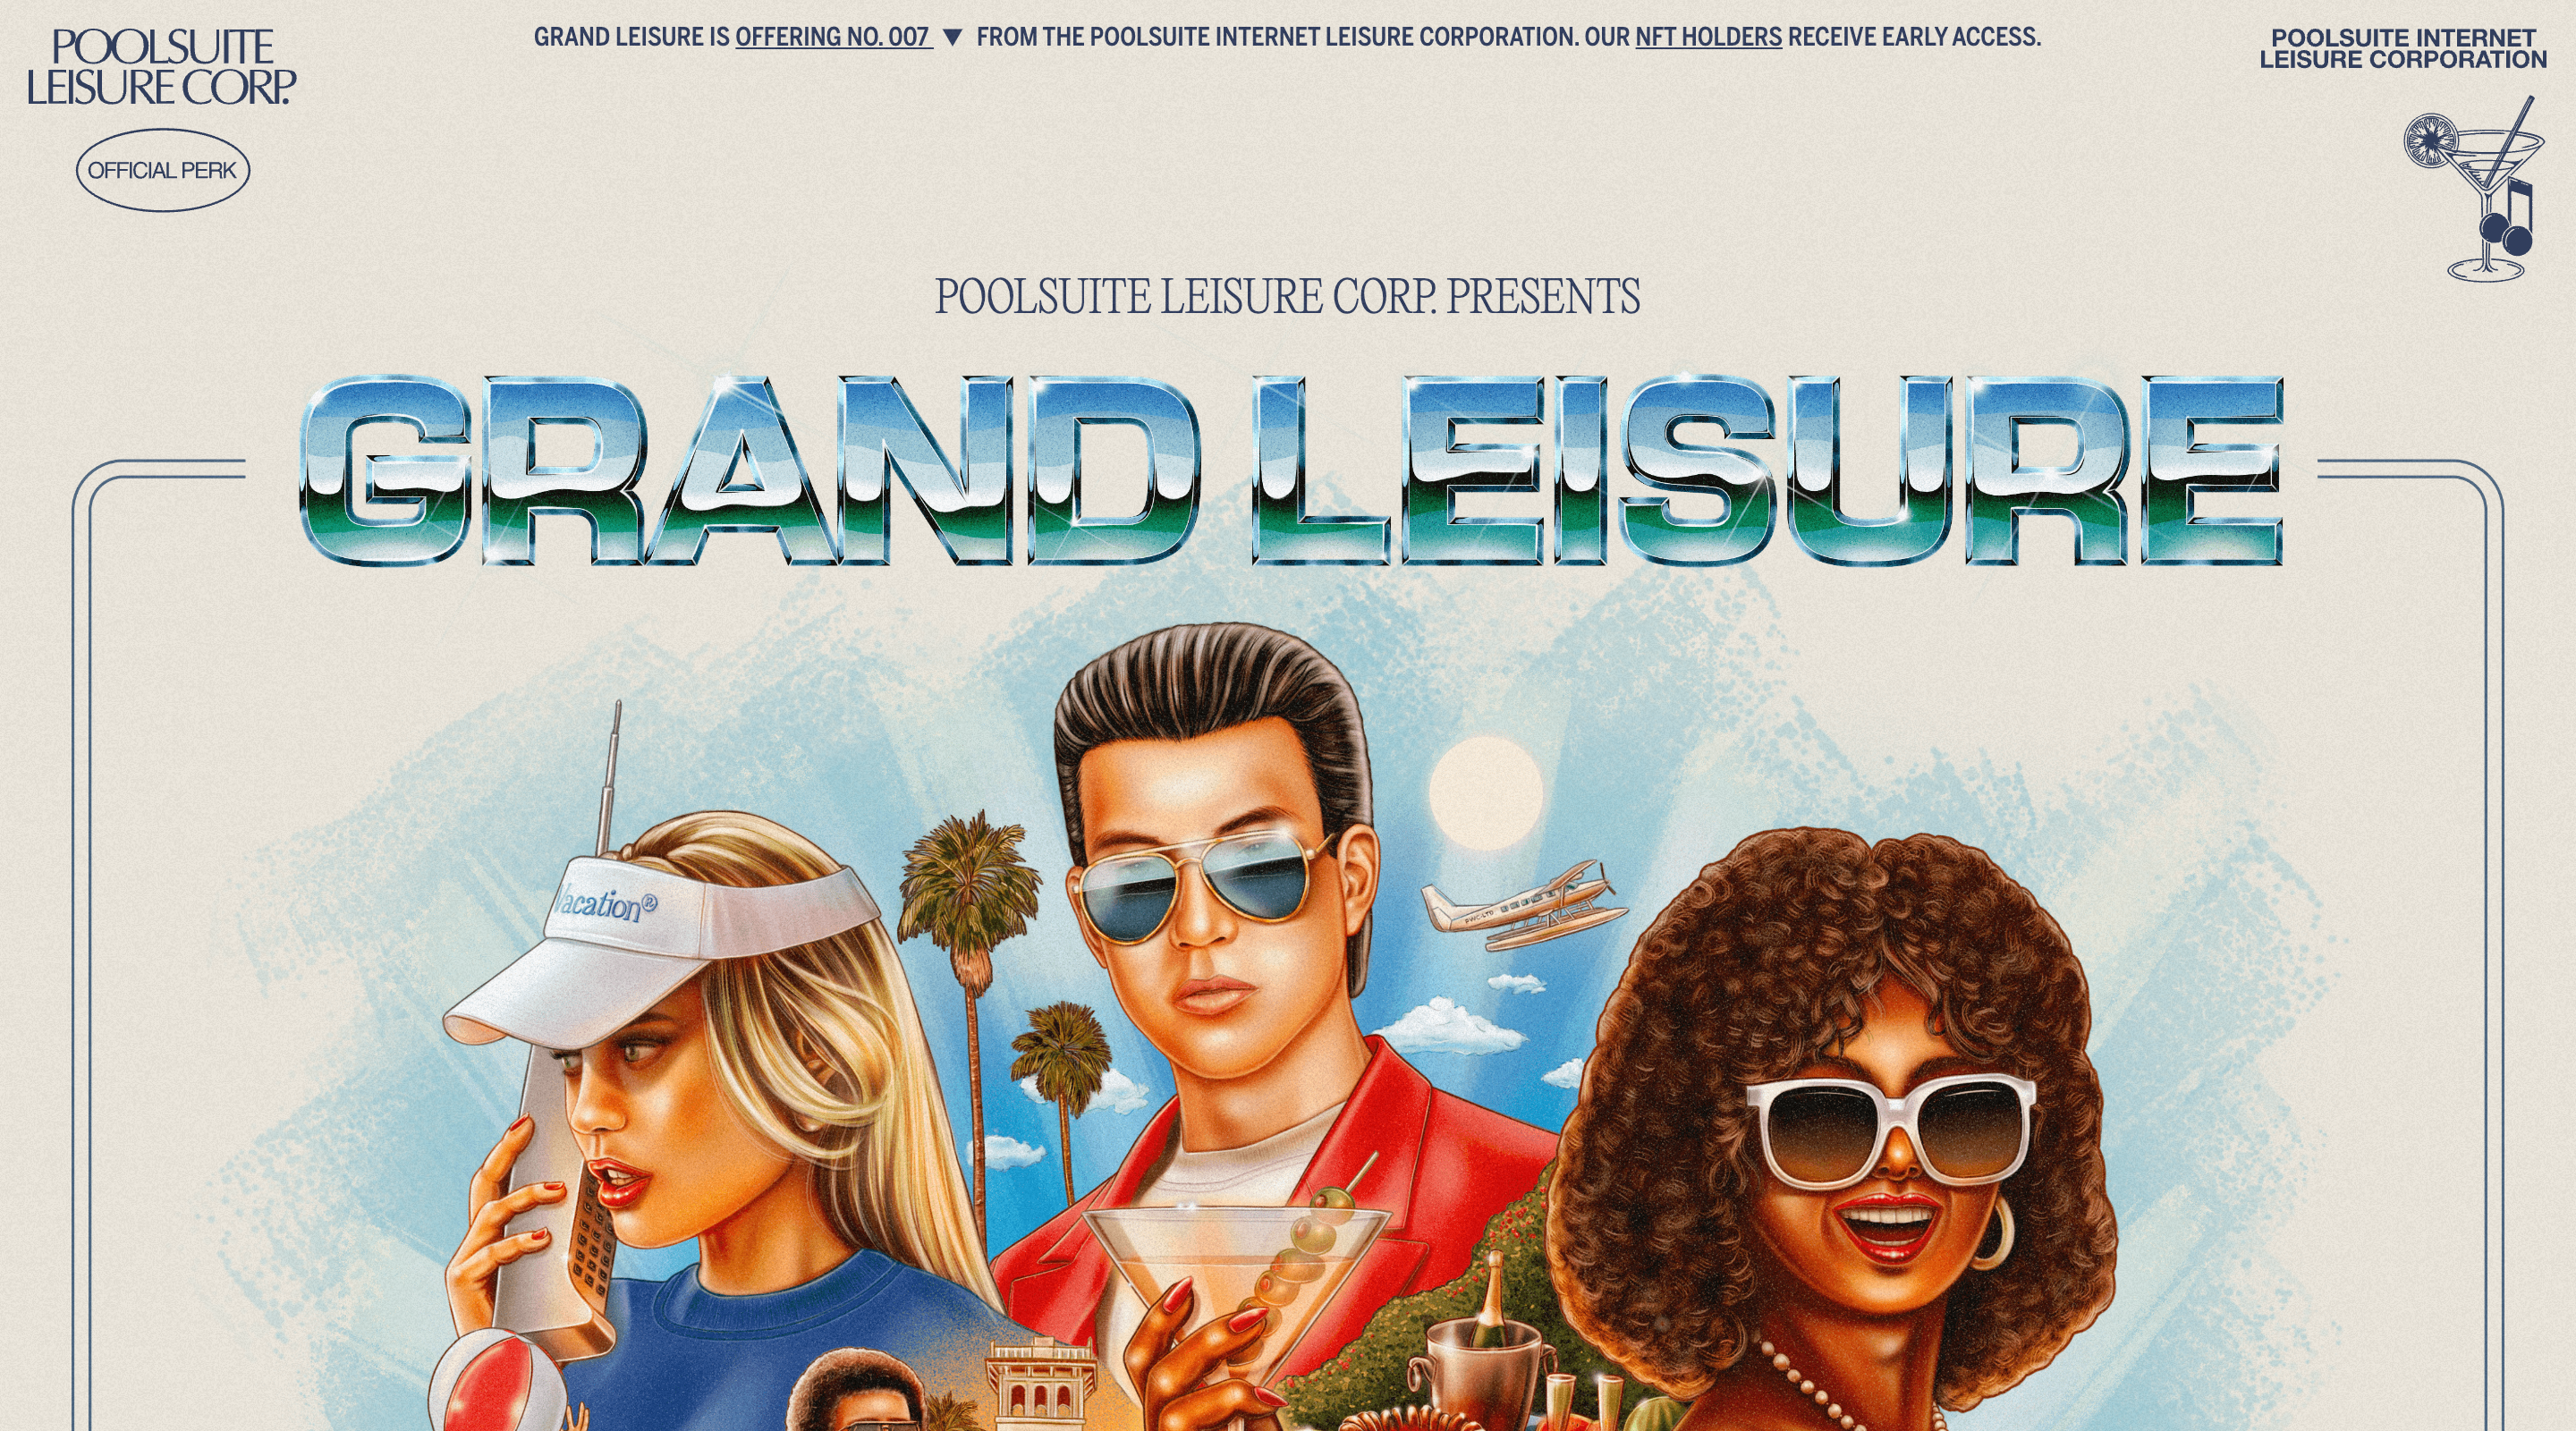 Screenshot of the Poolsuite Grand Leisure website. 'GRAND LEISURE' is displayed across the screen in large stylized lettering. Underneath is an elaborate 90s-style illustration of rich people.